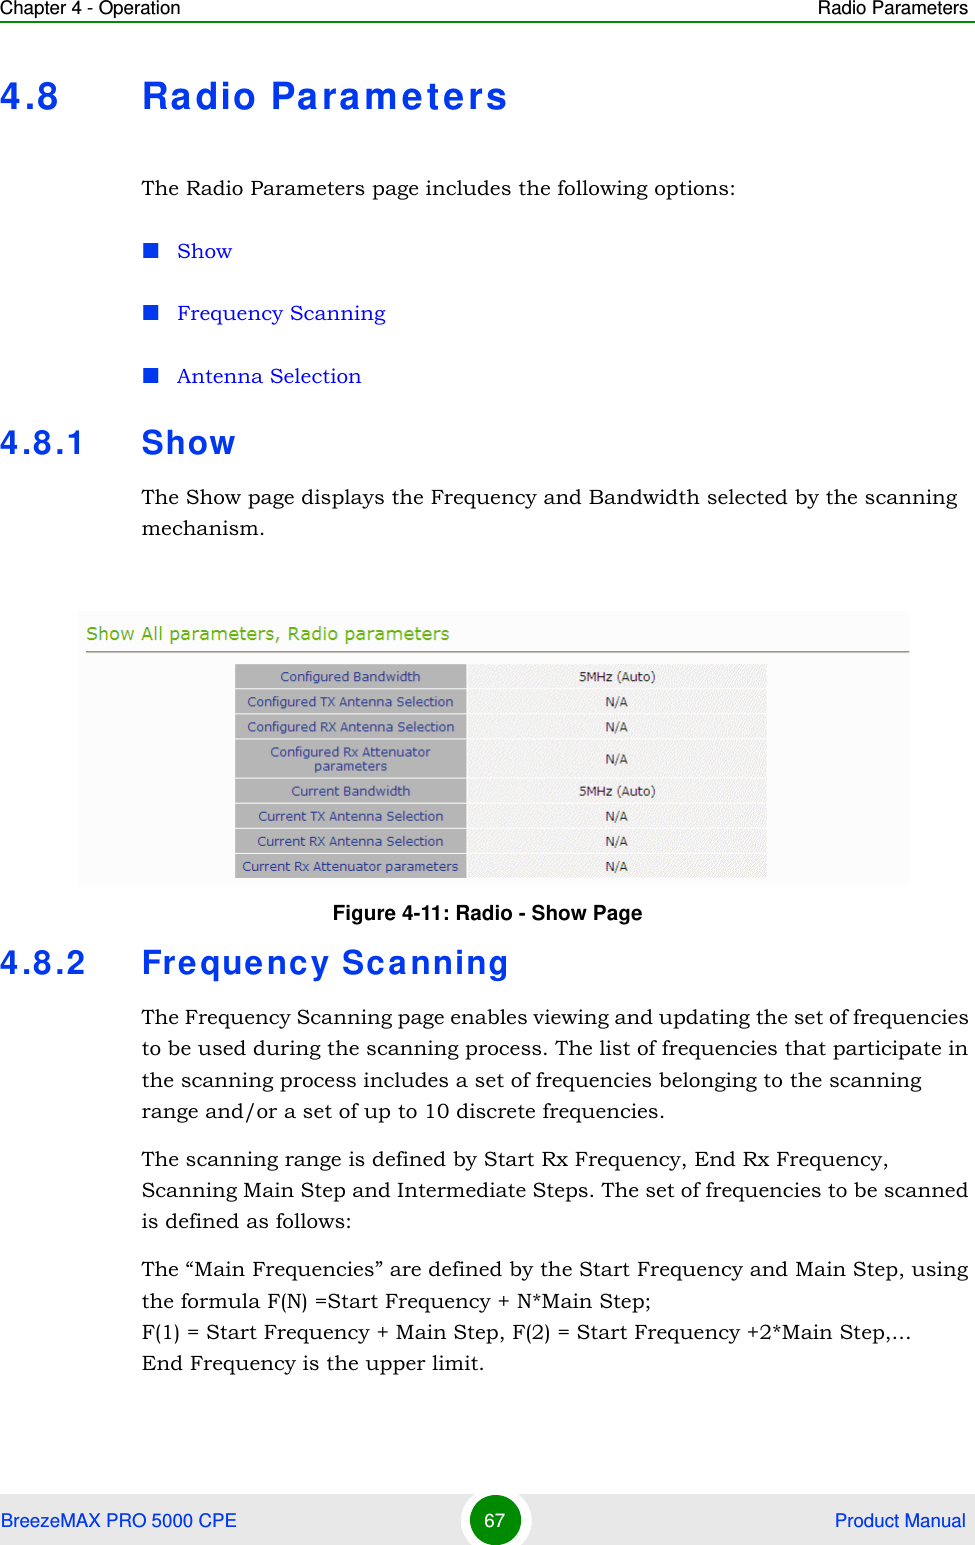 Chapter 4 - Operation Radio ParametersBreezeMAX PRO 5000 CPE 67  Product Manual4.8 Ra dio Paramete rsThe Radio Parameters page includes the following options:ShowFrequency ScanningAntenna Selection4.8.1 ShowThe Show page displays the Frequency and Bandwidth selected by the scanning mechanism.4.8.2 Frequency Sca nningThe Frequency Scanning page enables viewing and updating the set of frequencies to be used during the scanning process. The list of frequencies that participate in the scanning process includes a set of frequencies belonging to the scanning range and/or a set of up to 10 discrete frequencies. The scanning range is defined by Start Rx Frequency, End Rx Frequency, Scanning Main Step and Intermediate Steps. The set of frequencies to be scanned is defined as follows:The “Main Frequencies” are defined by the Start Frequency and Main Step, using the formula F(N) =Start Frequency + N*Main Step; F(1) = Start Frequency + Main Step, F(2) = Start Frequency +2*Main Step,...End Frequency is the upper limit.Figure 4-11: Radio - Show Page